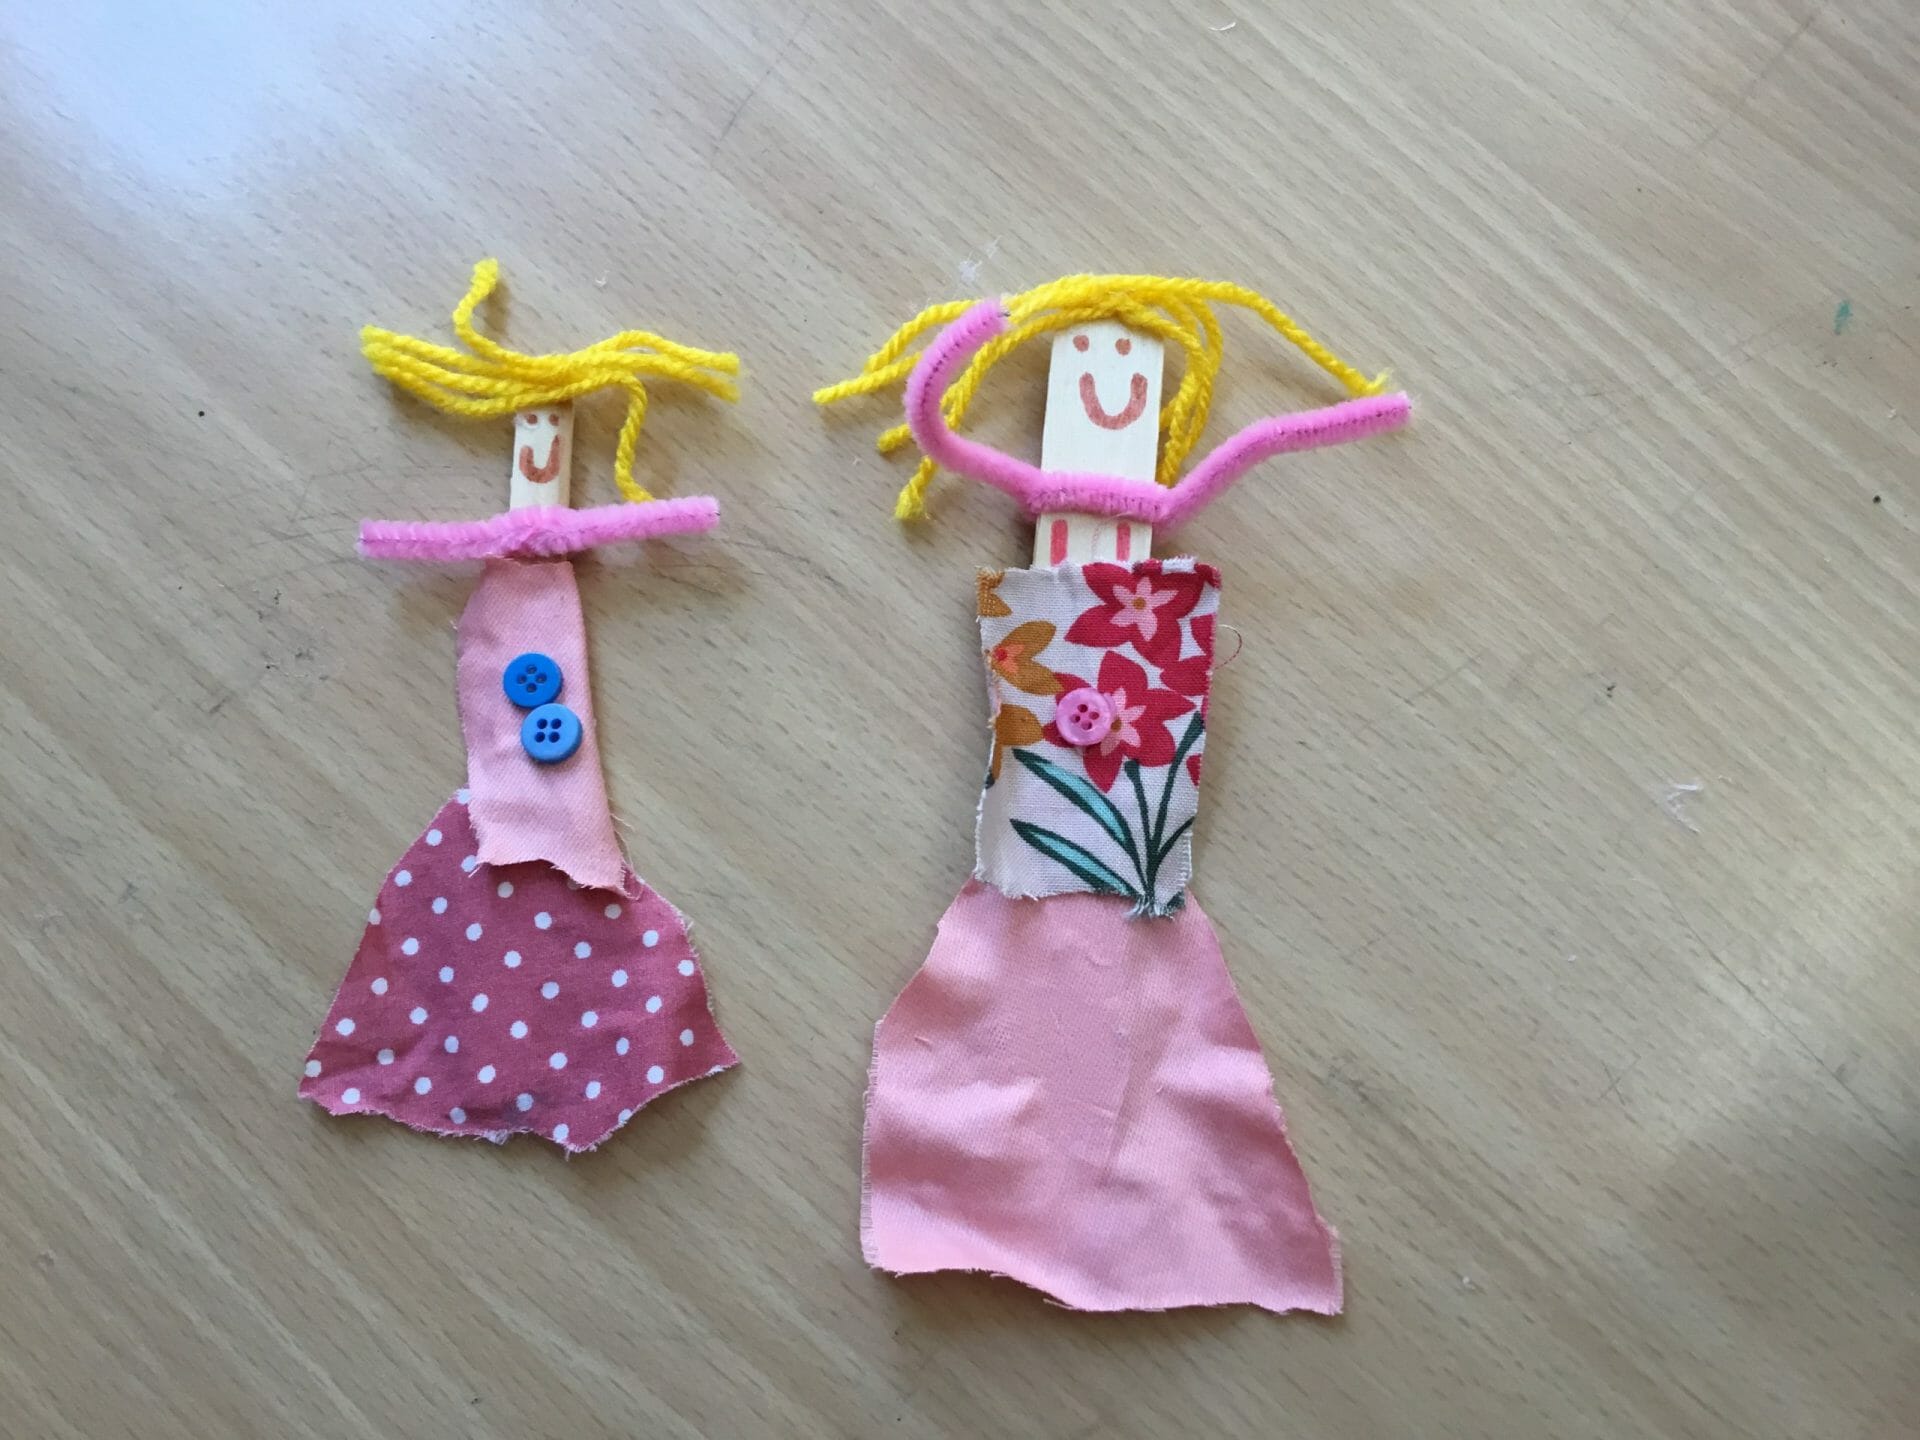 The Worry Doll – How might it help your child(ren)?